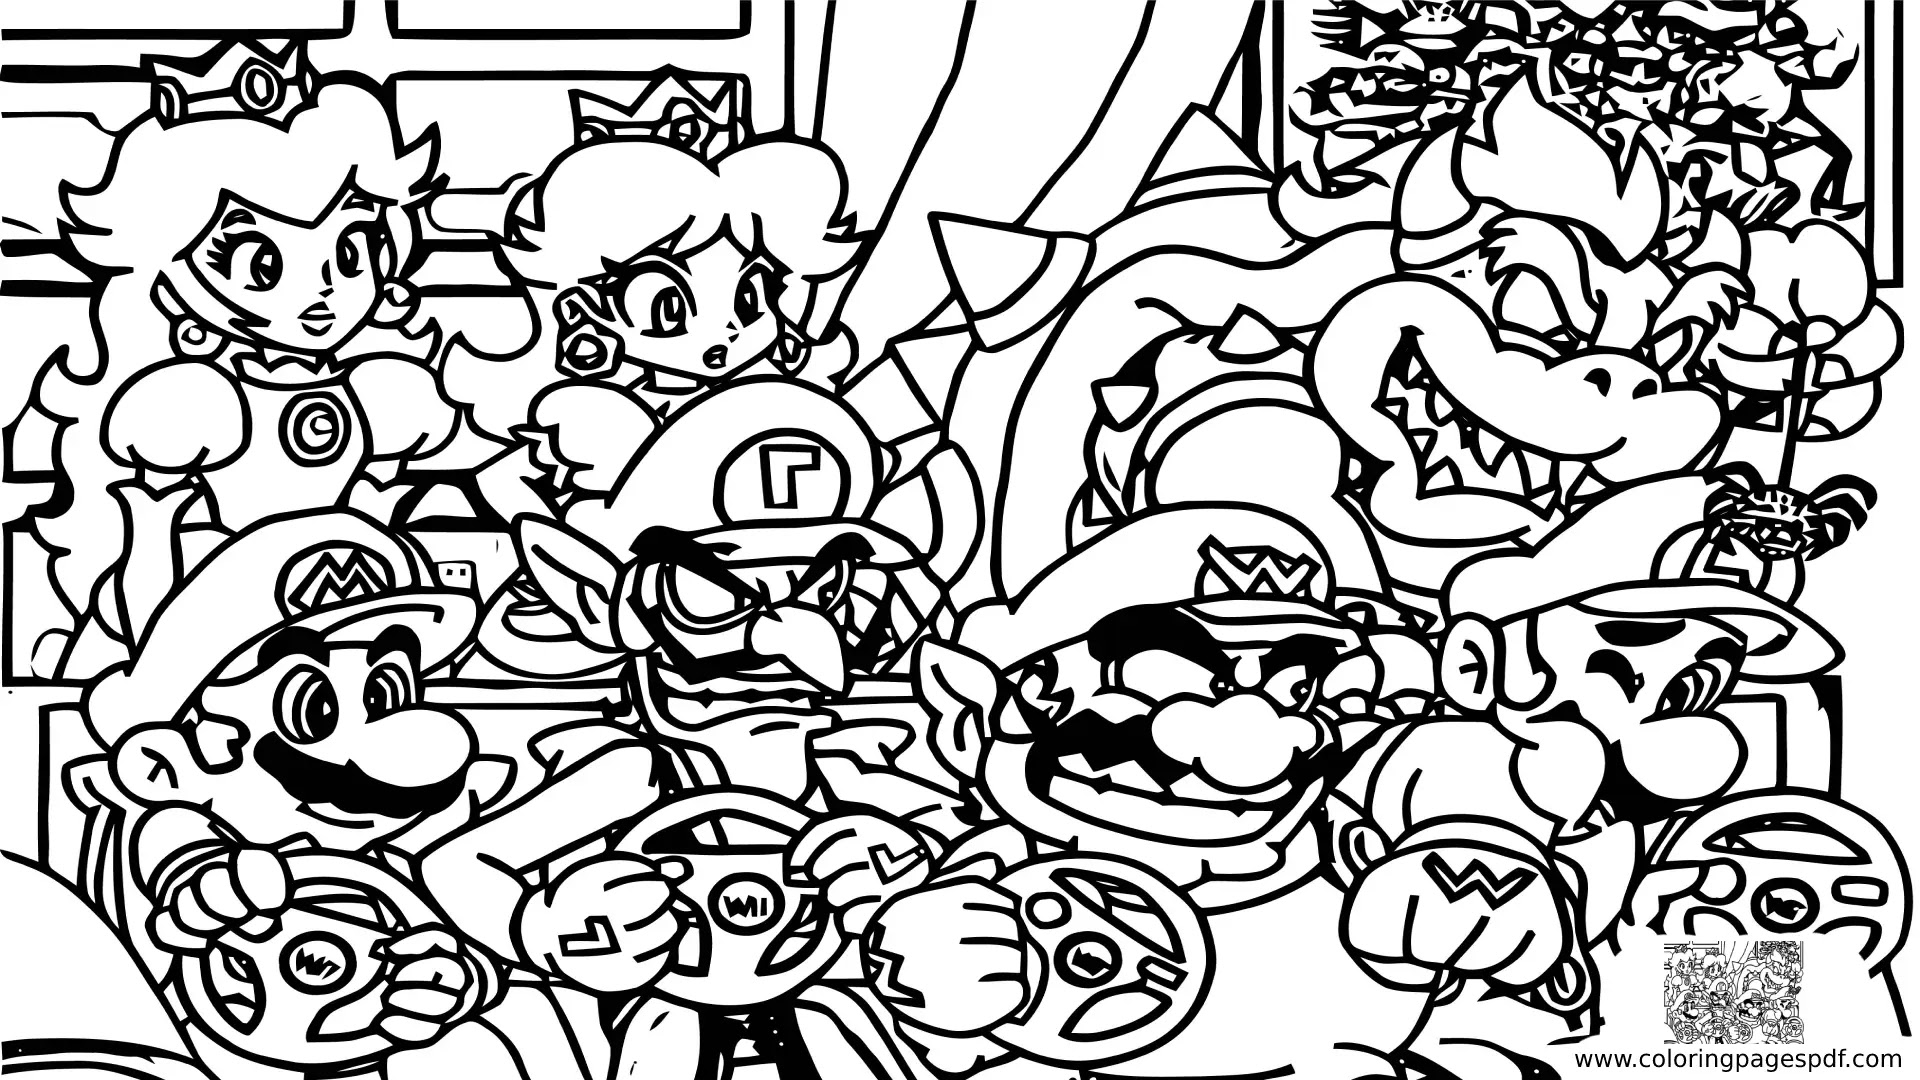 Coloring Pages Of Mario Kart Characters